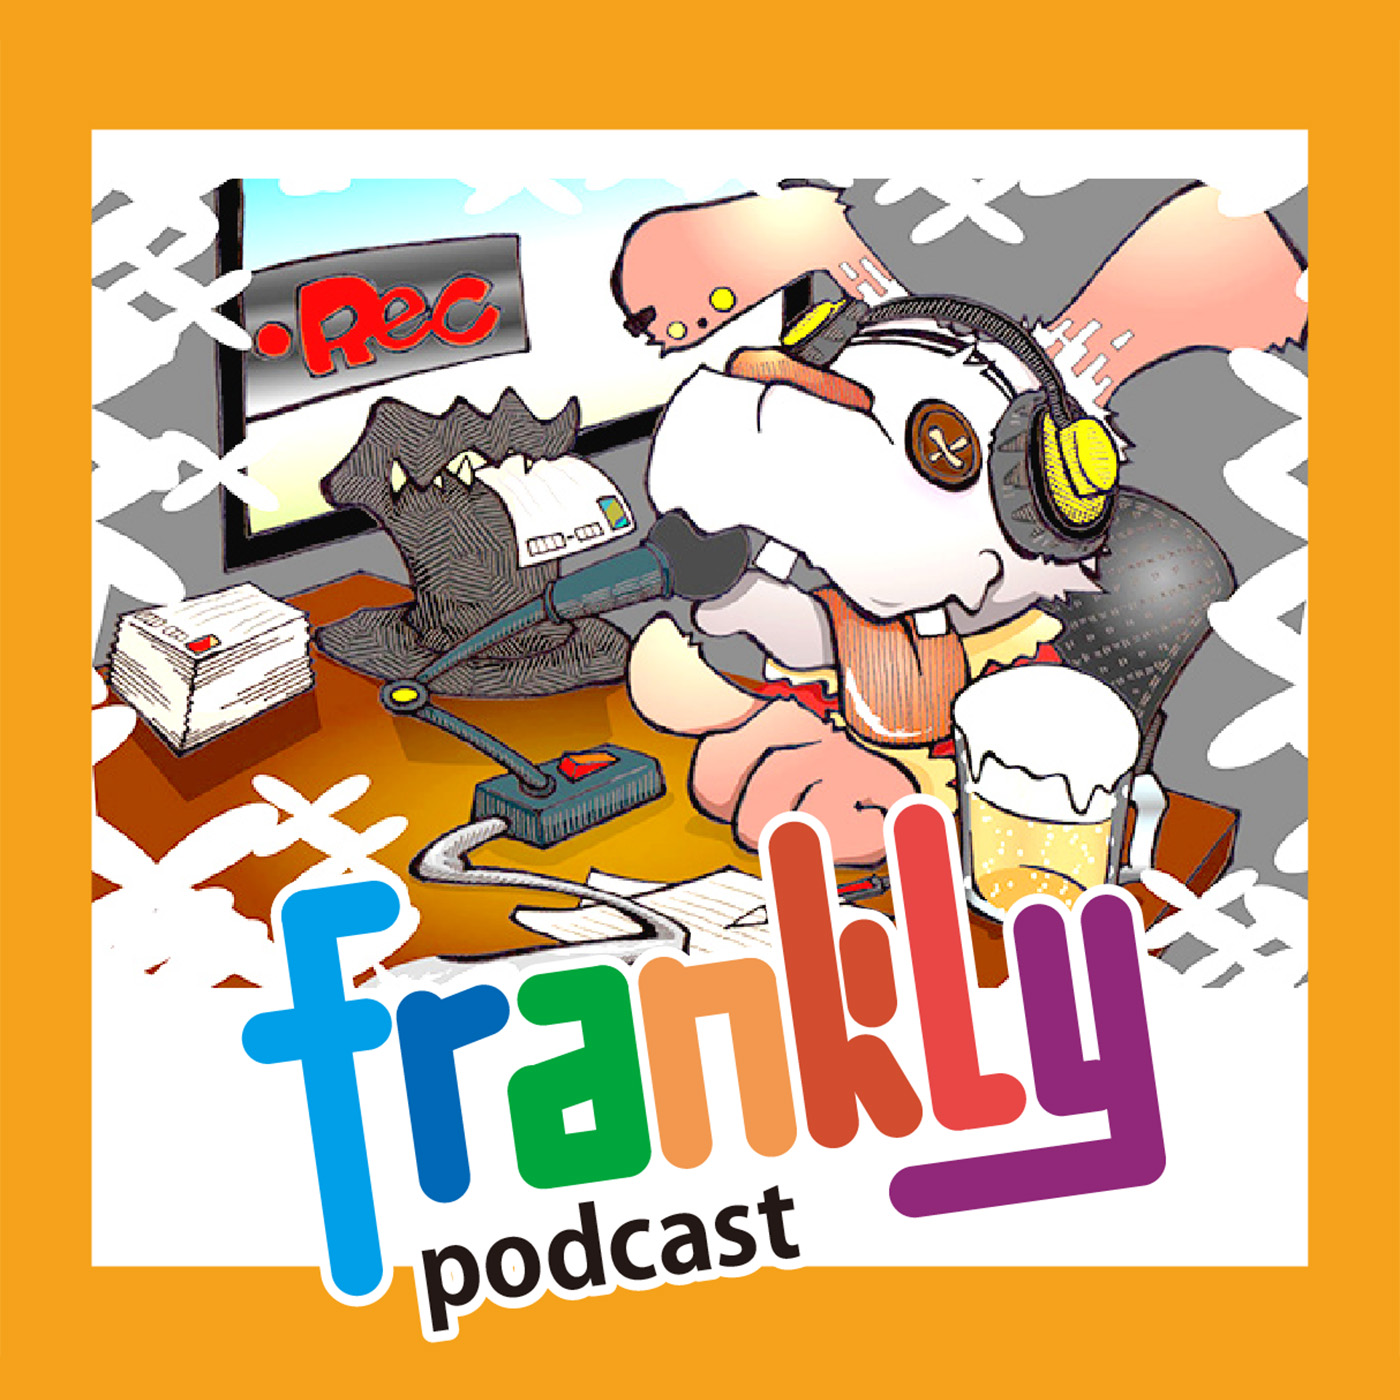 frankly podcast.